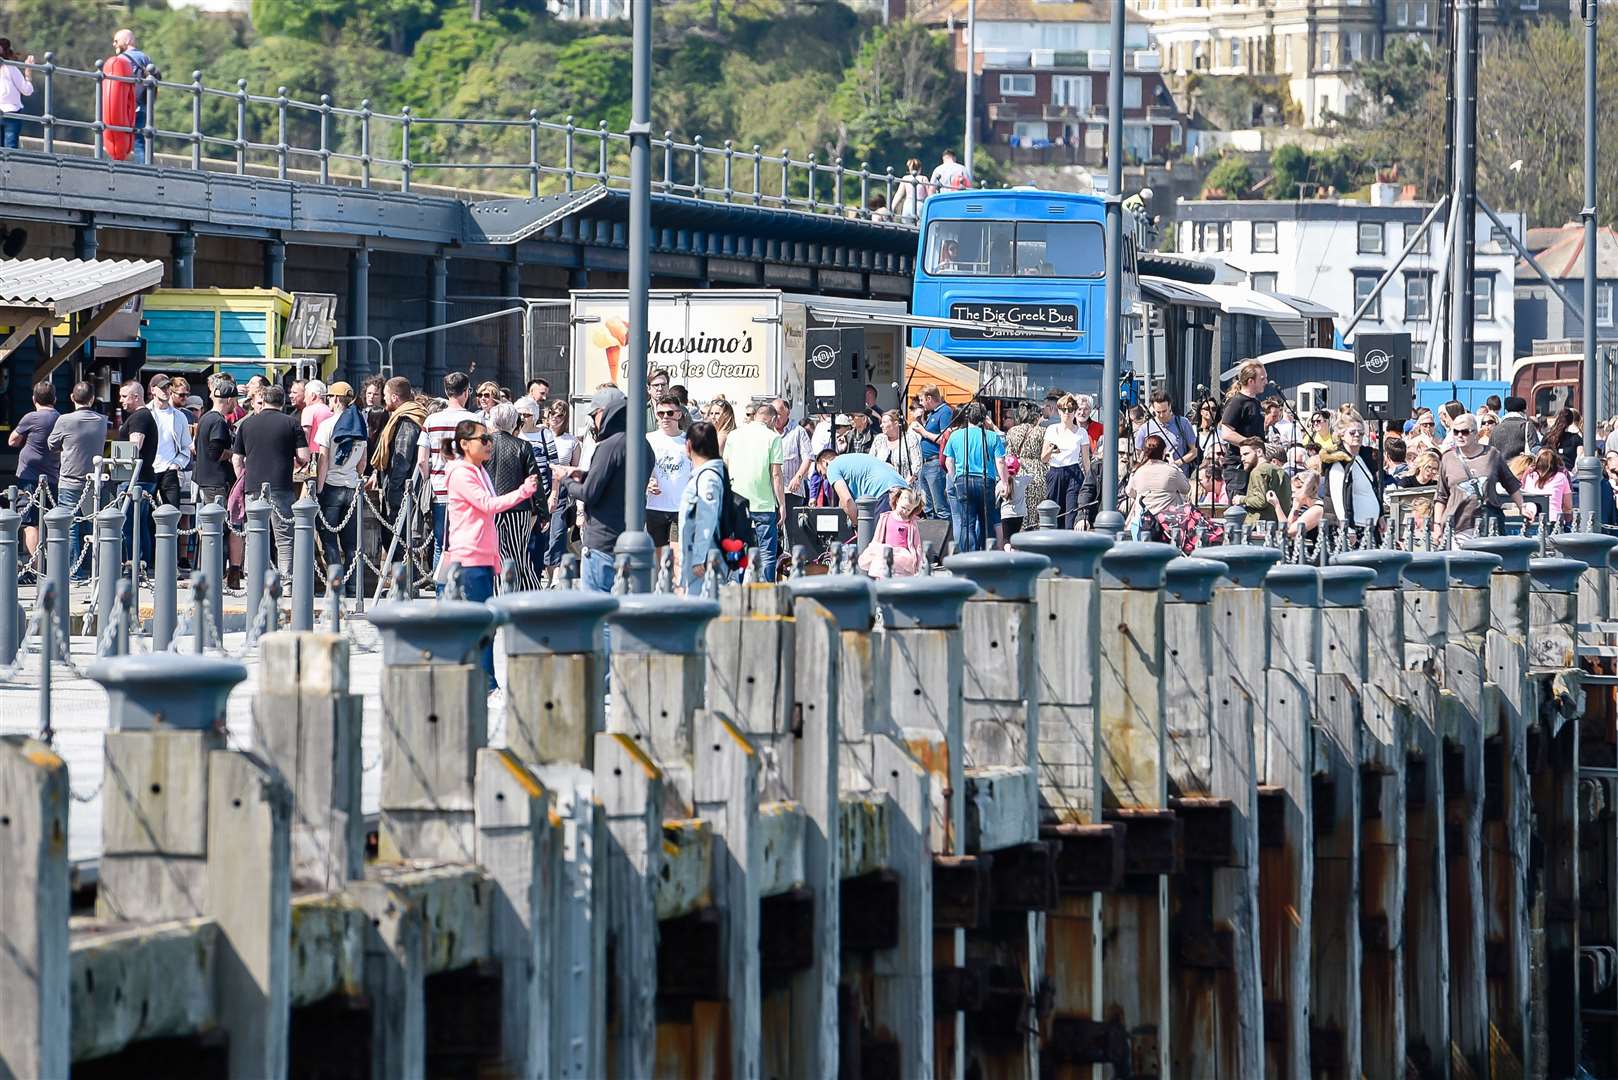 The shuttle was dropping people near the harbour. Picture: Alan Langley